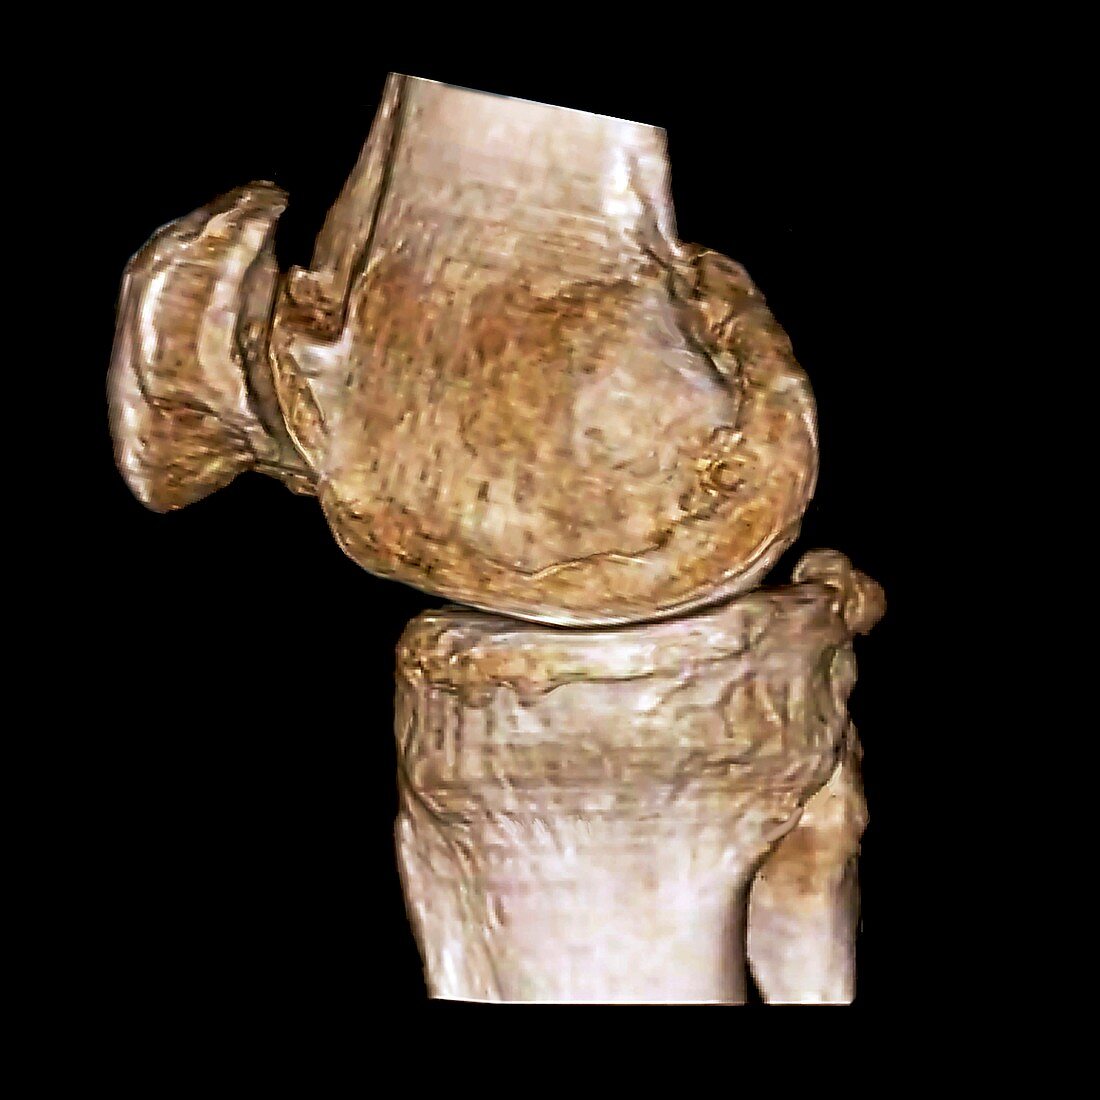 Osteoarthritis of the knee,3D CT scan